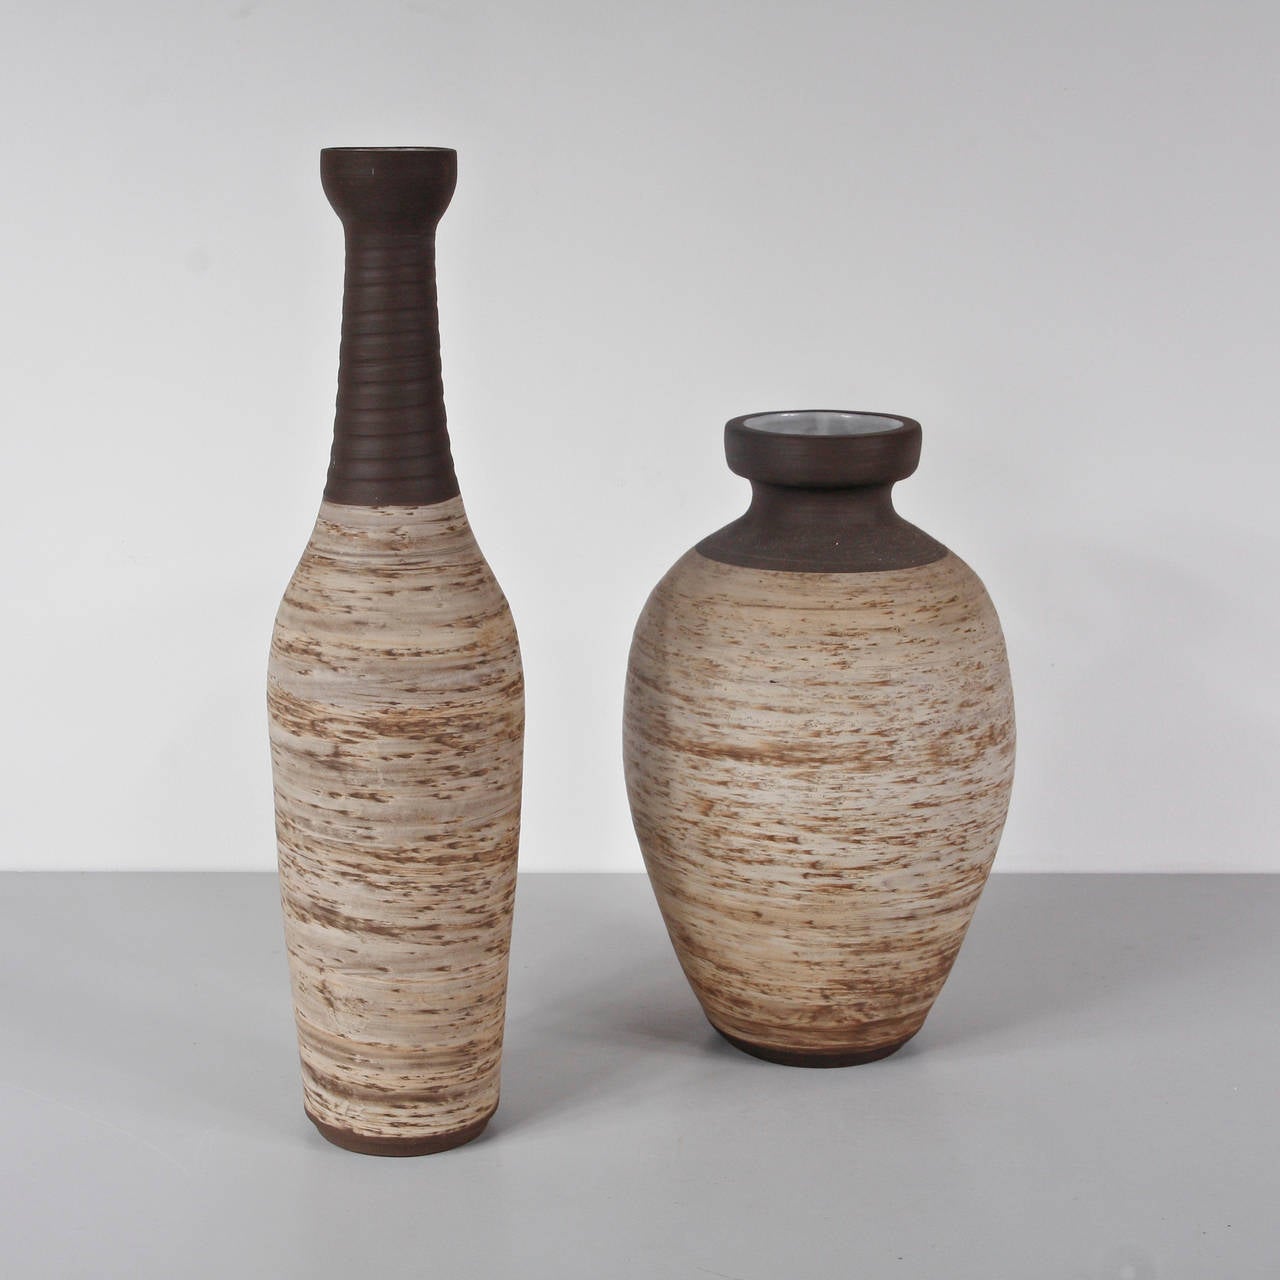 Pair of beautiful ceramic vases by Ravelli.
Thrown to the wheel clay shaped by hand with characteristic glaze in excellent condition.

Manufactured circa 1960 in the Netherlands.